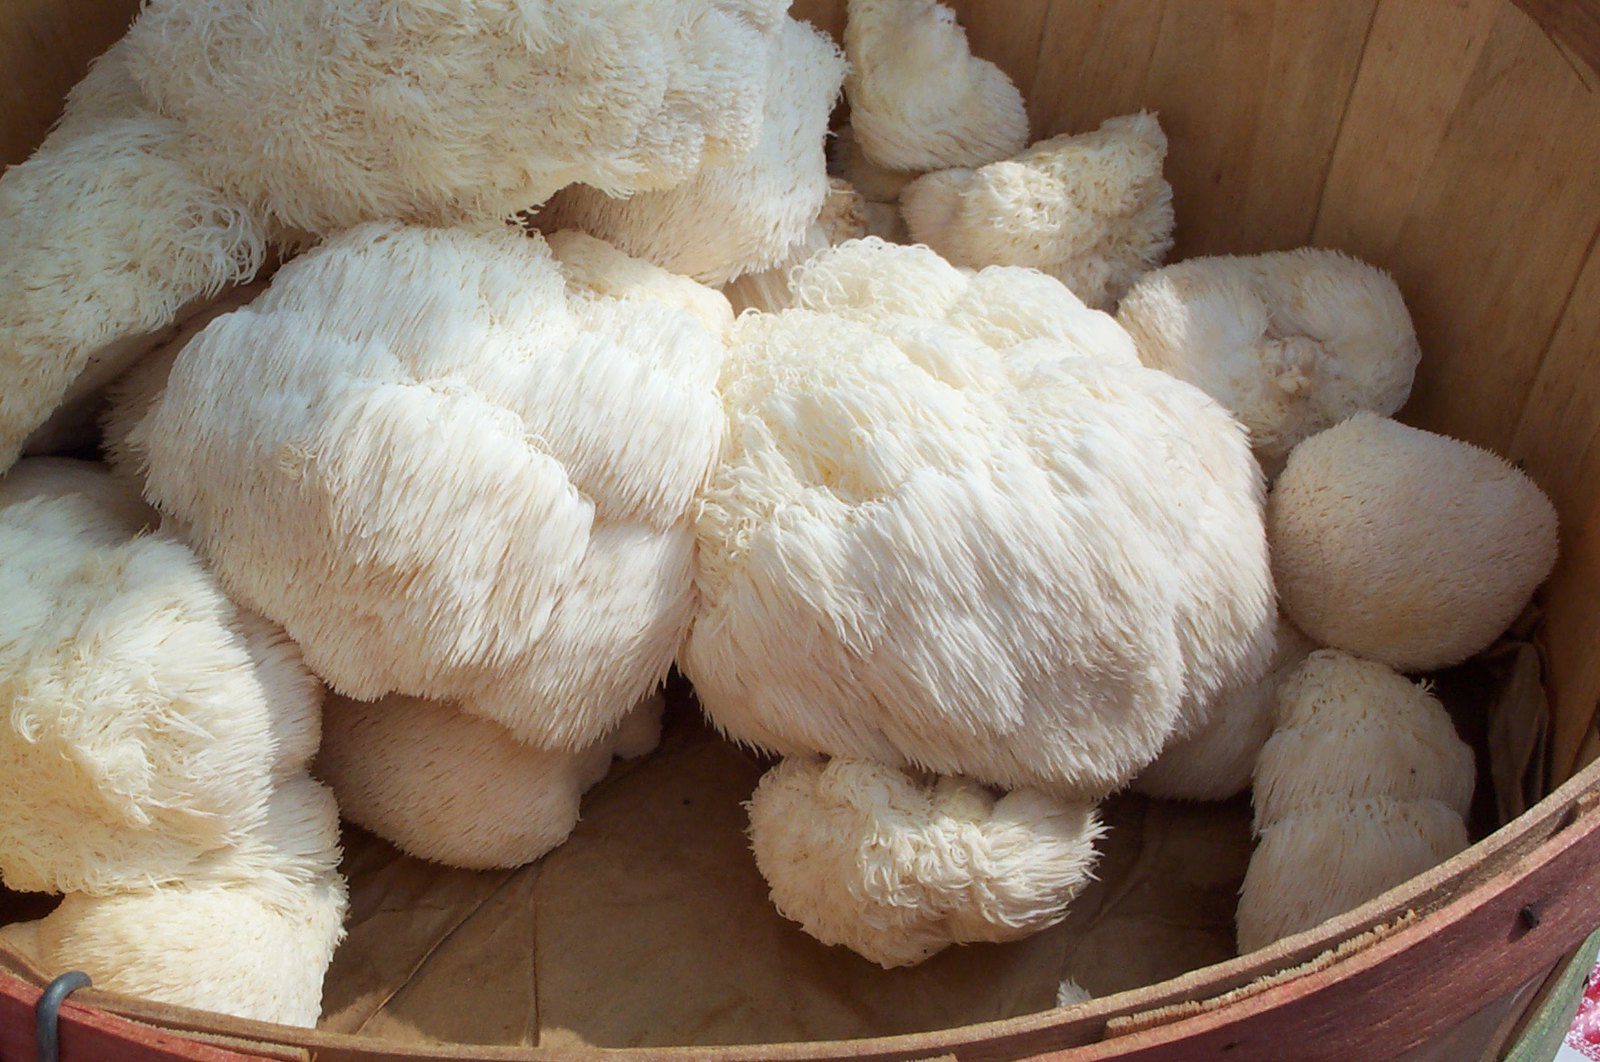 Why Lion’s Mane Mushrooms are the New Superfood?